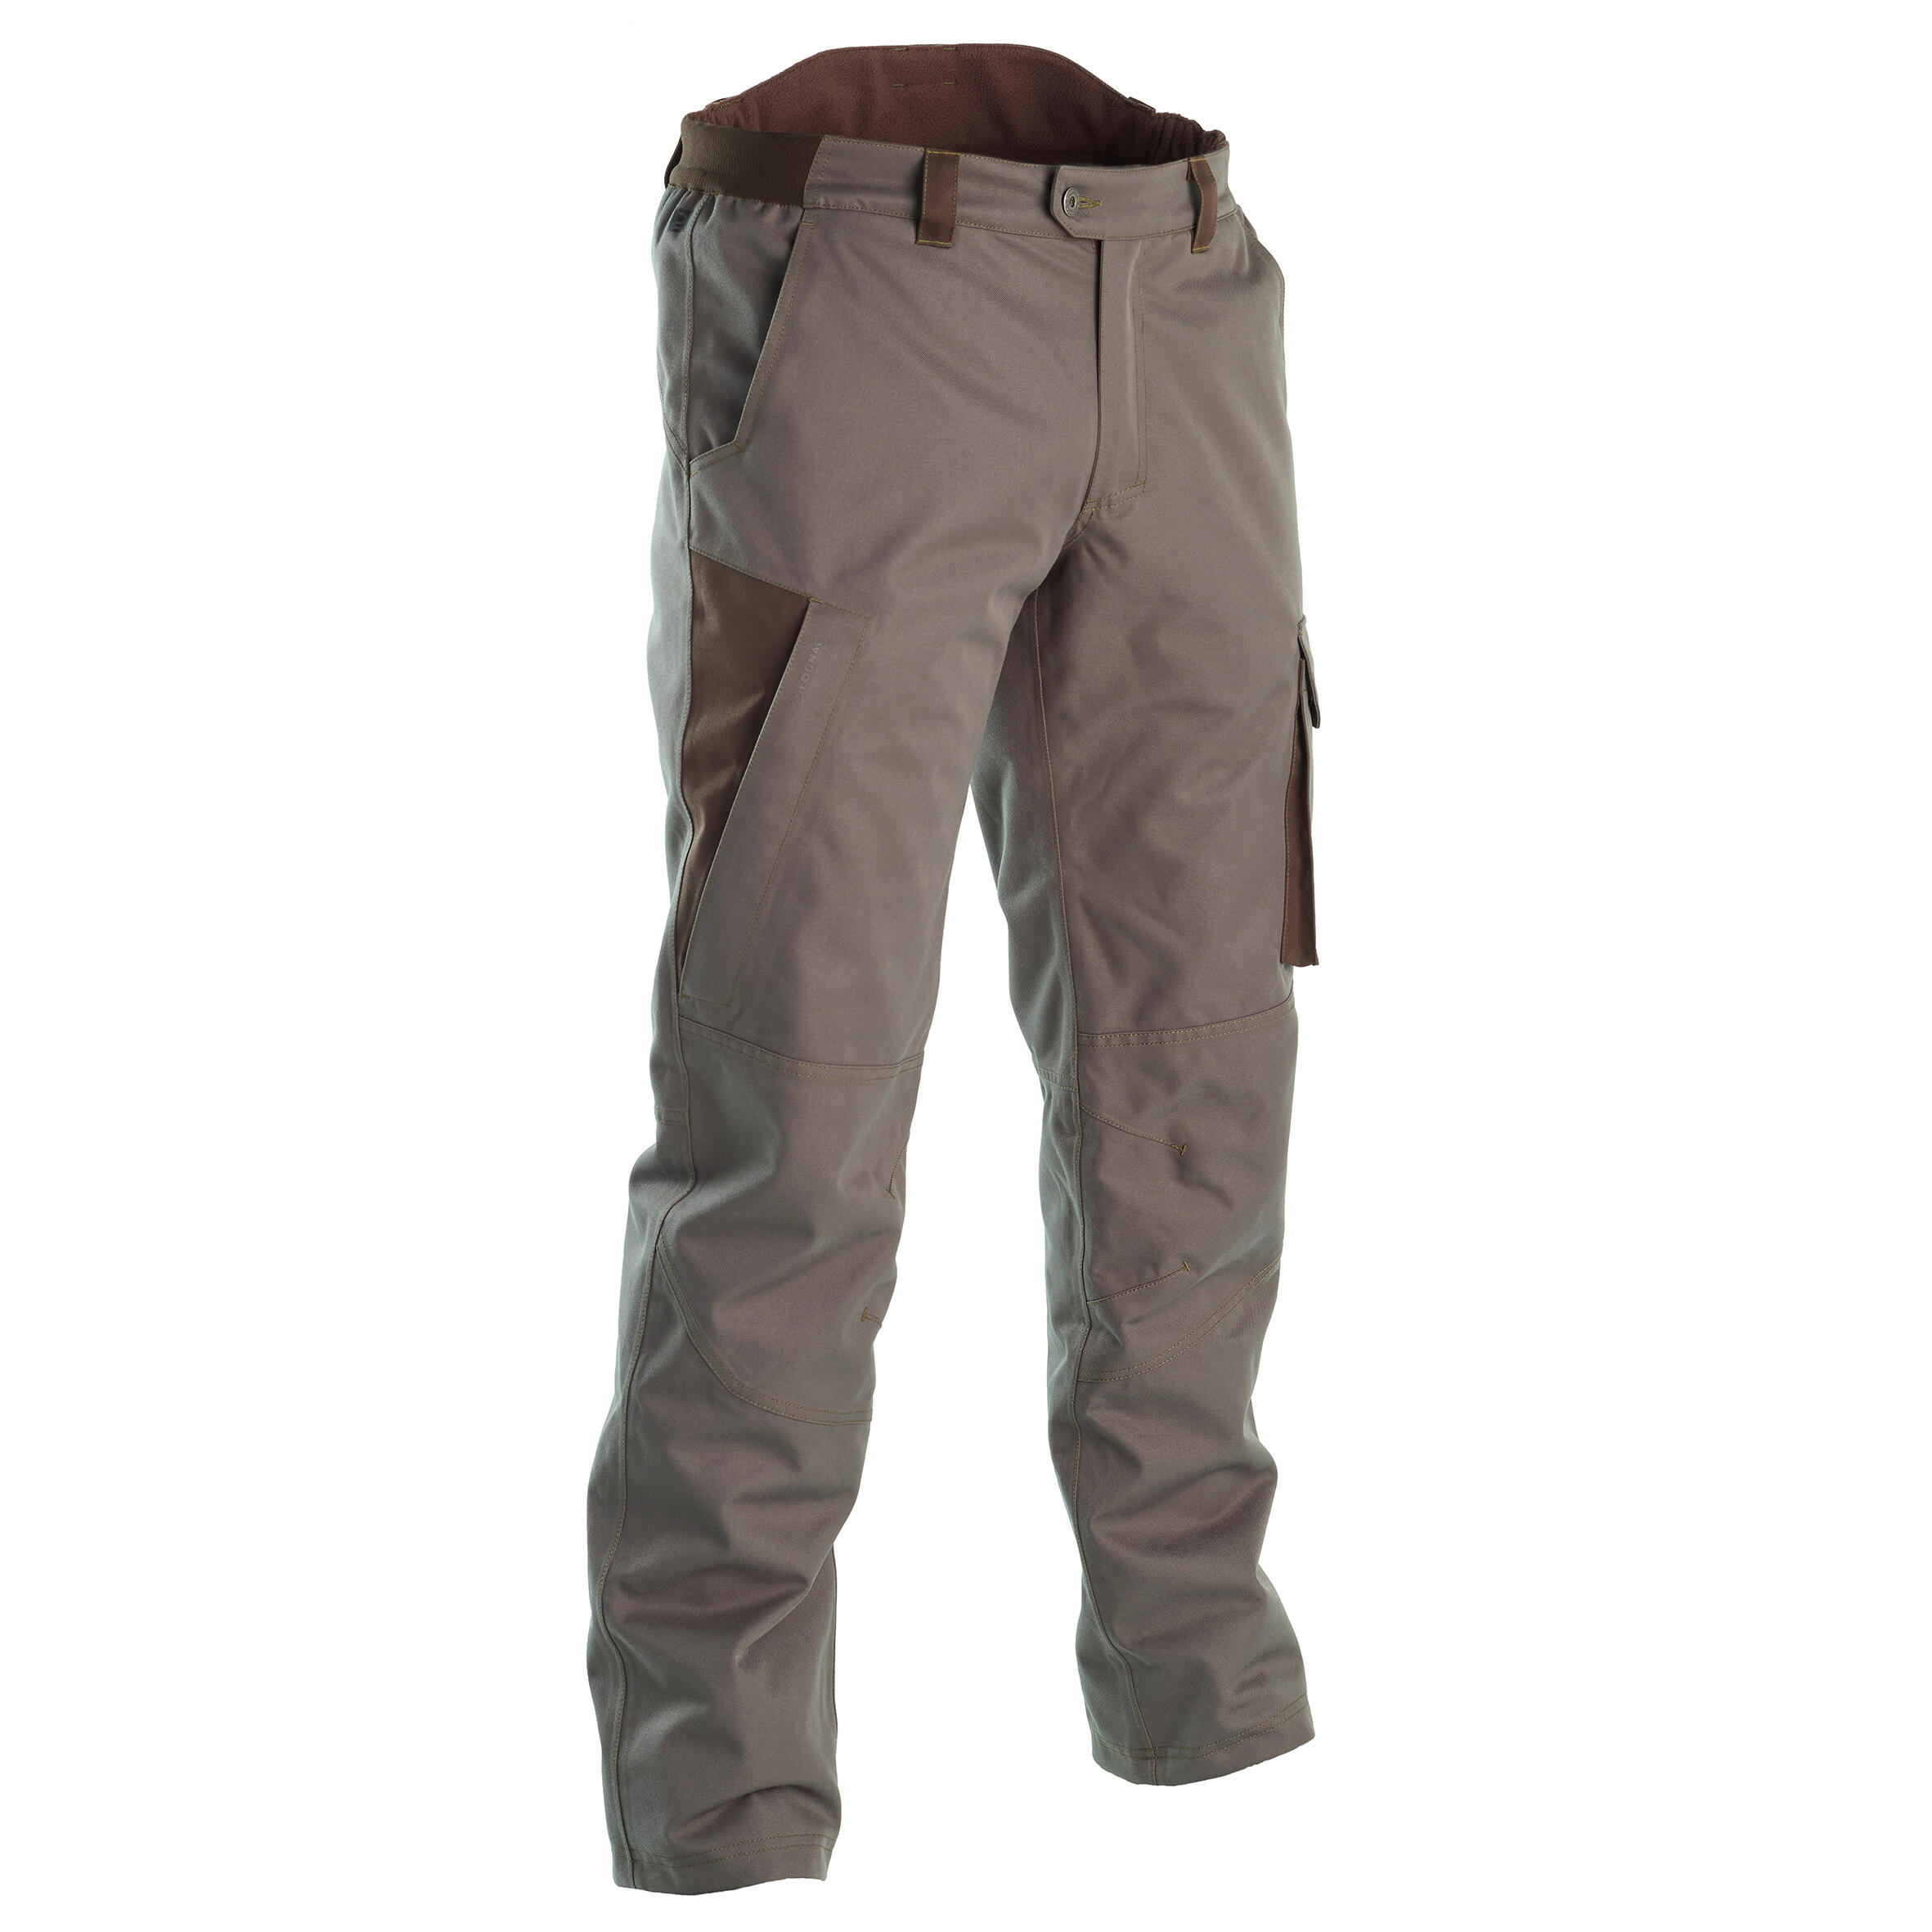 Hunting trousers Bois 900 breathable SOLOGNAC | Decathlon